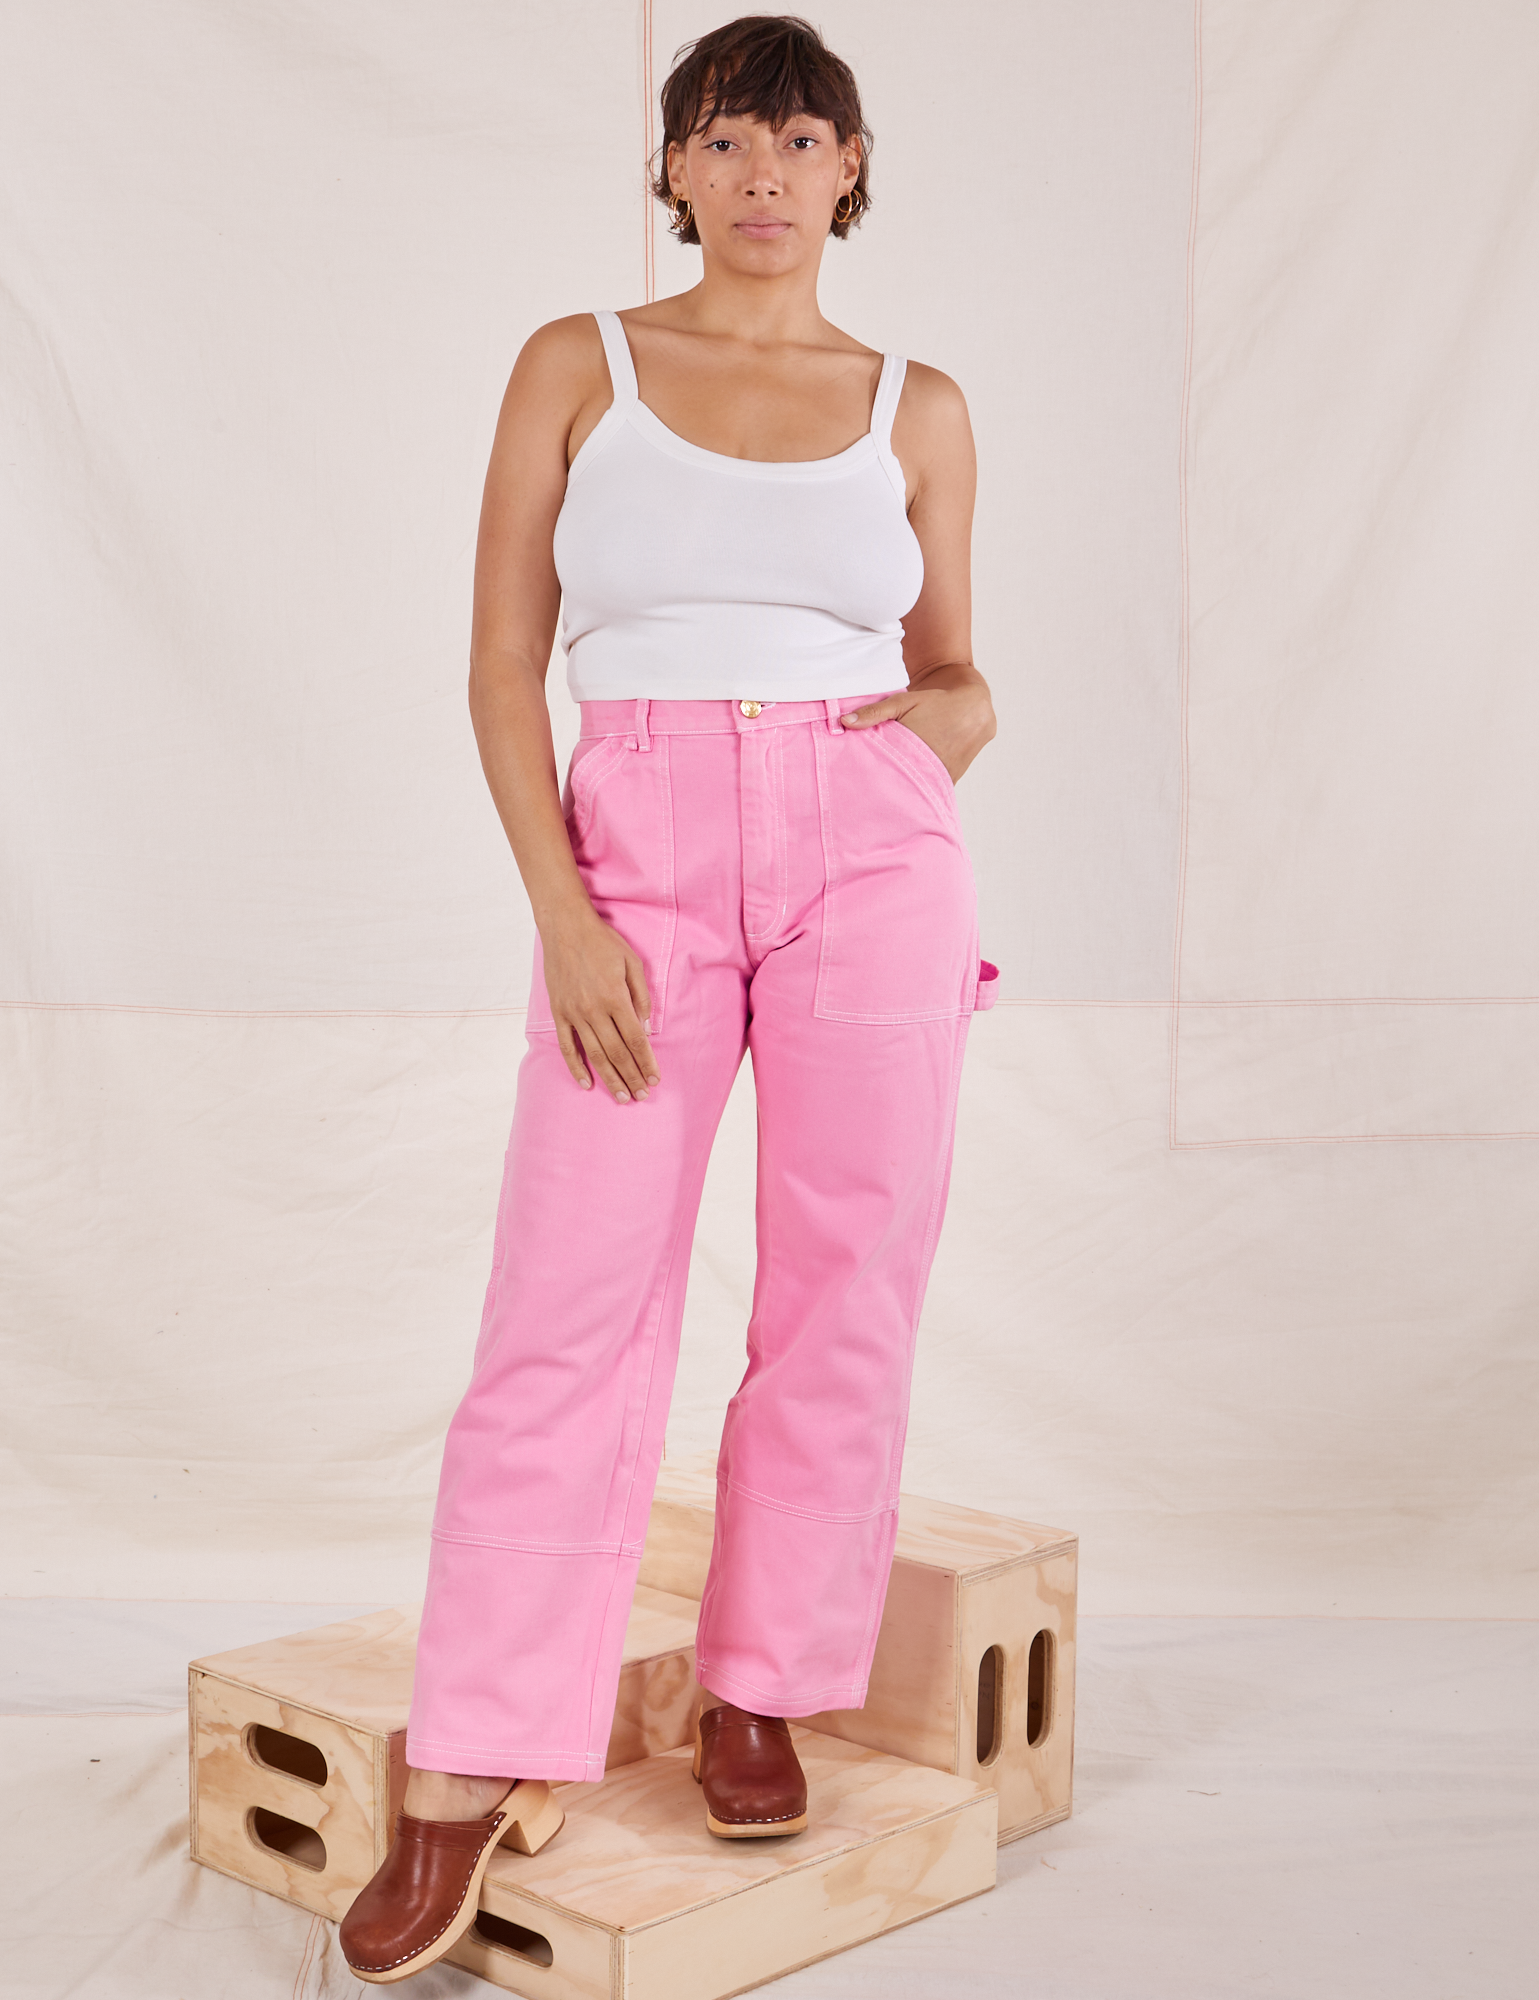 Tiara is 5&#39;4&quot; and wearing S Carpenter Jeans in Bubblegum Pink paired with a vintage off-white Cami